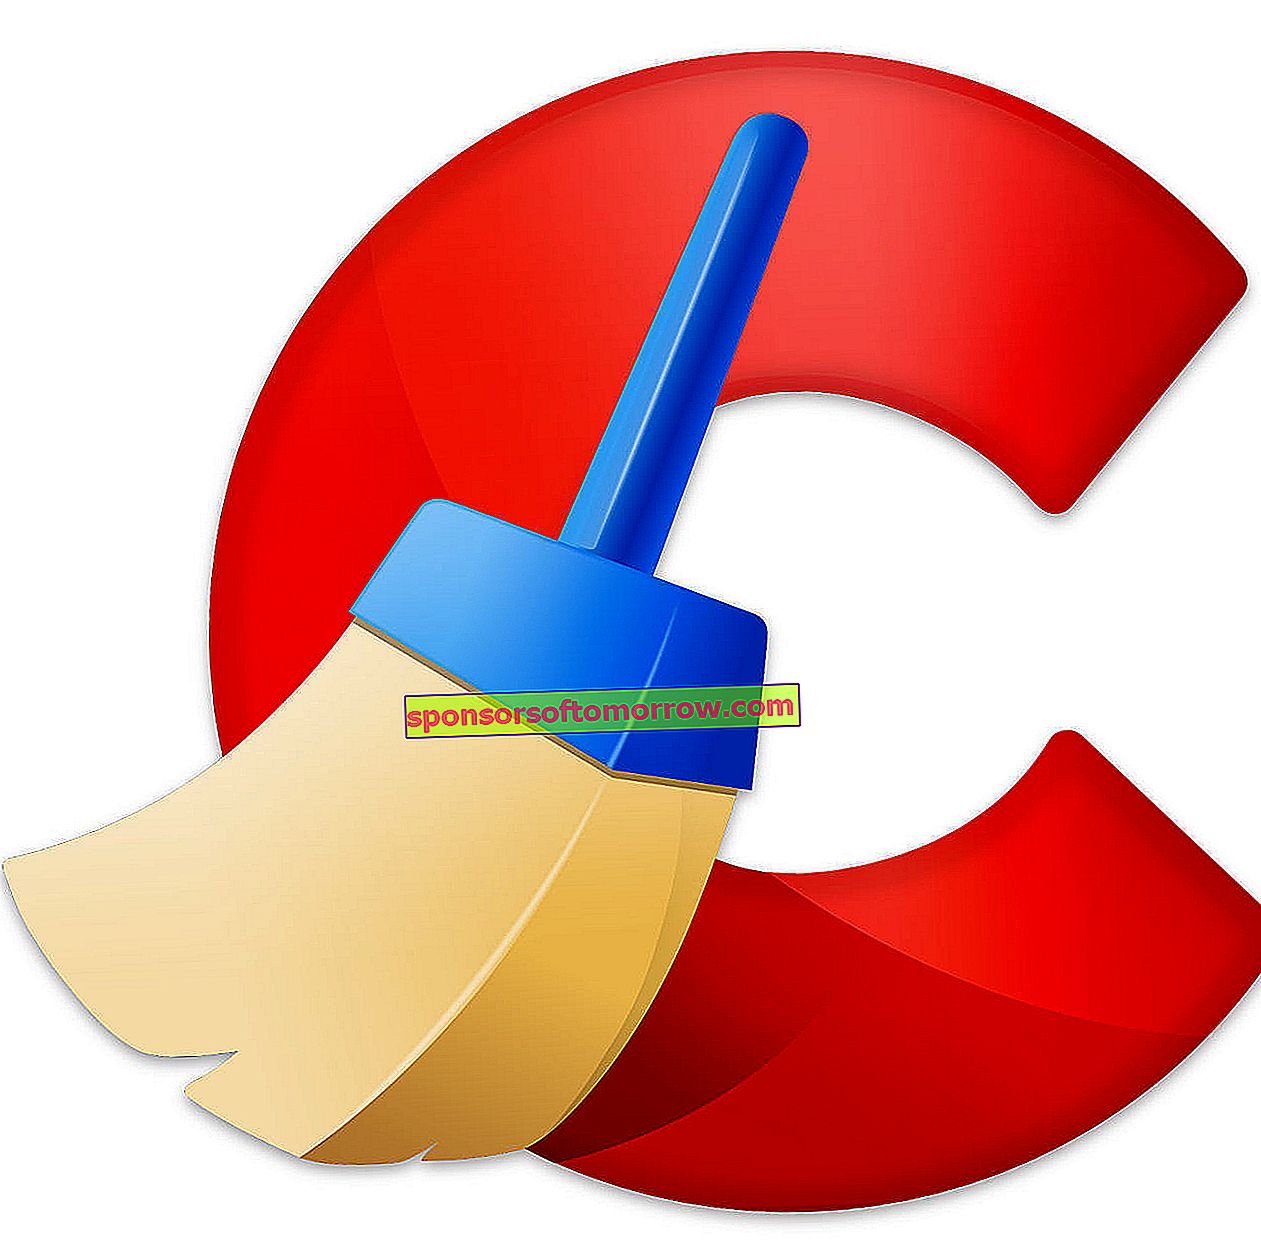 It is good to use CCleaner in Windows 10